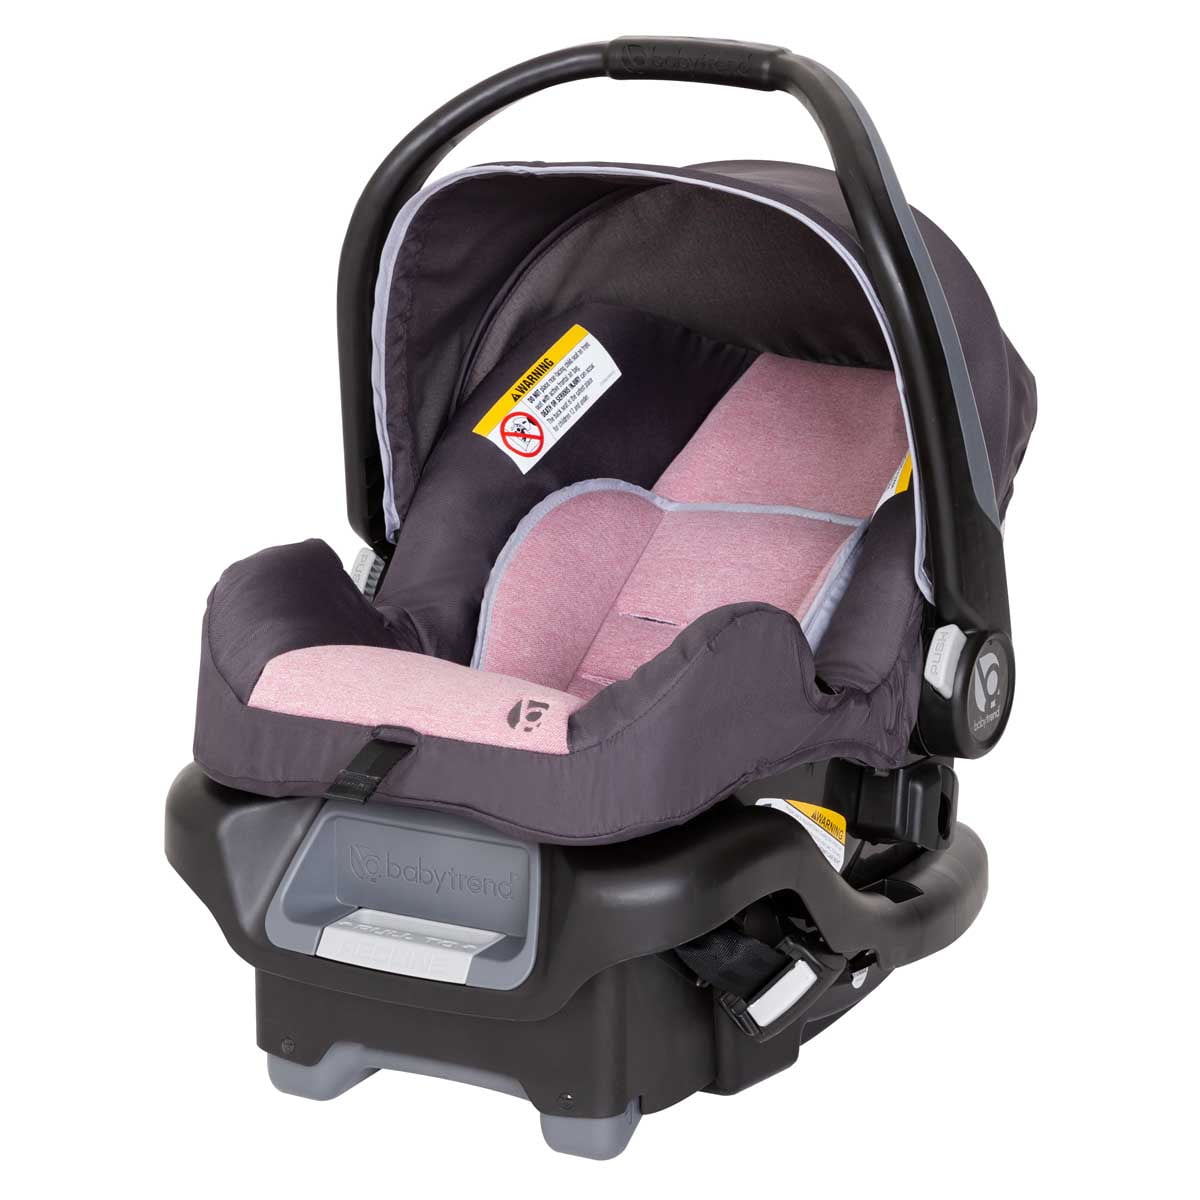 baby trend infant car seats